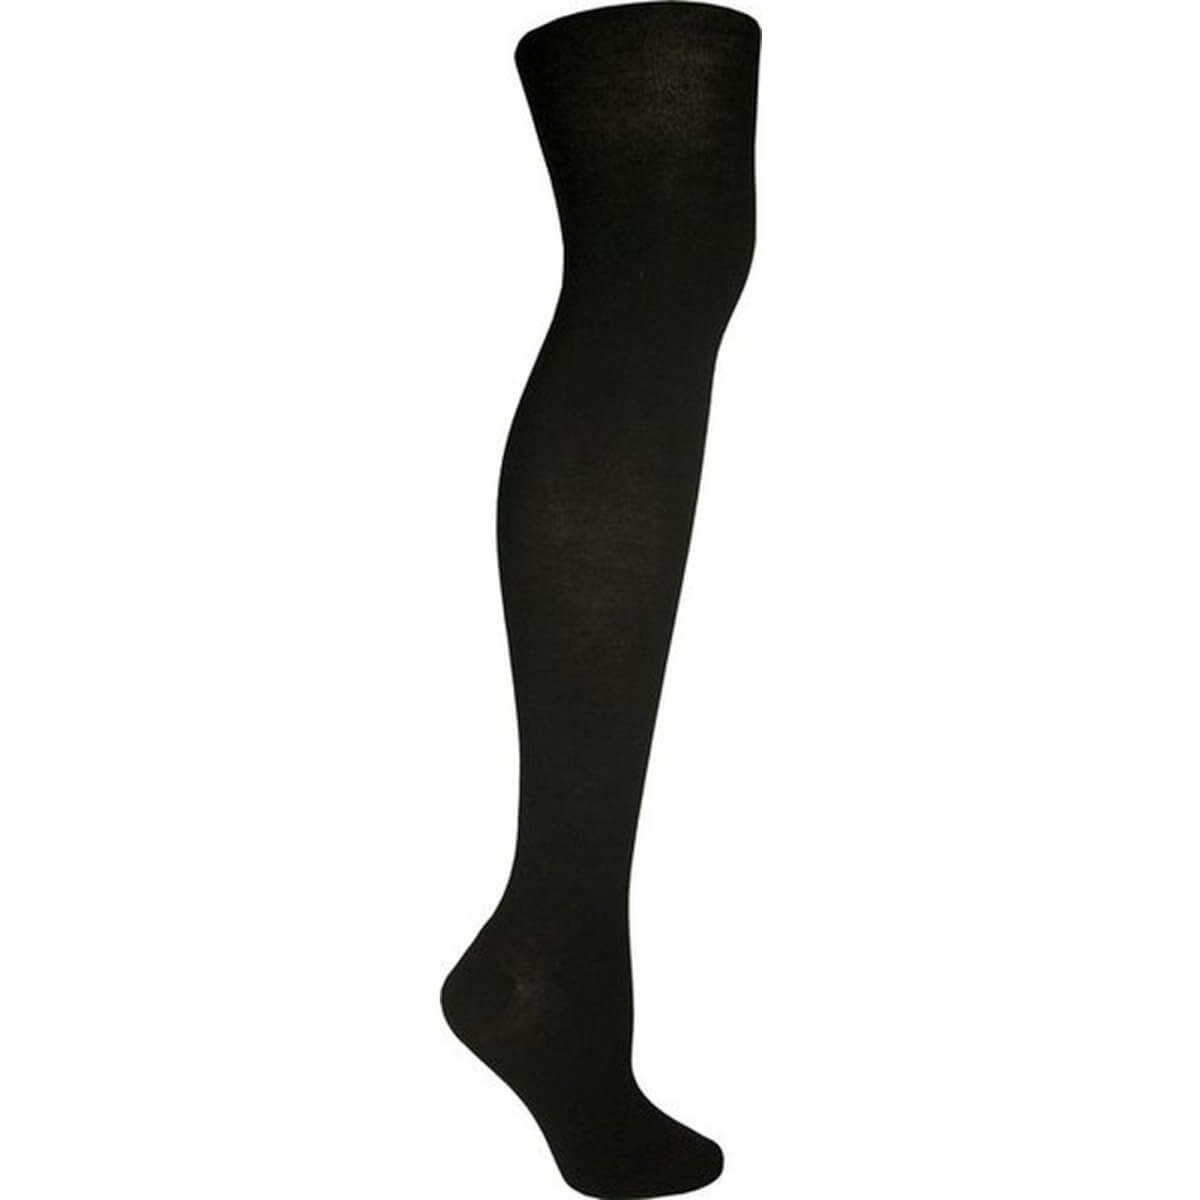 Angora Jambiere Over the Knee Sock - Scarvesnthangs